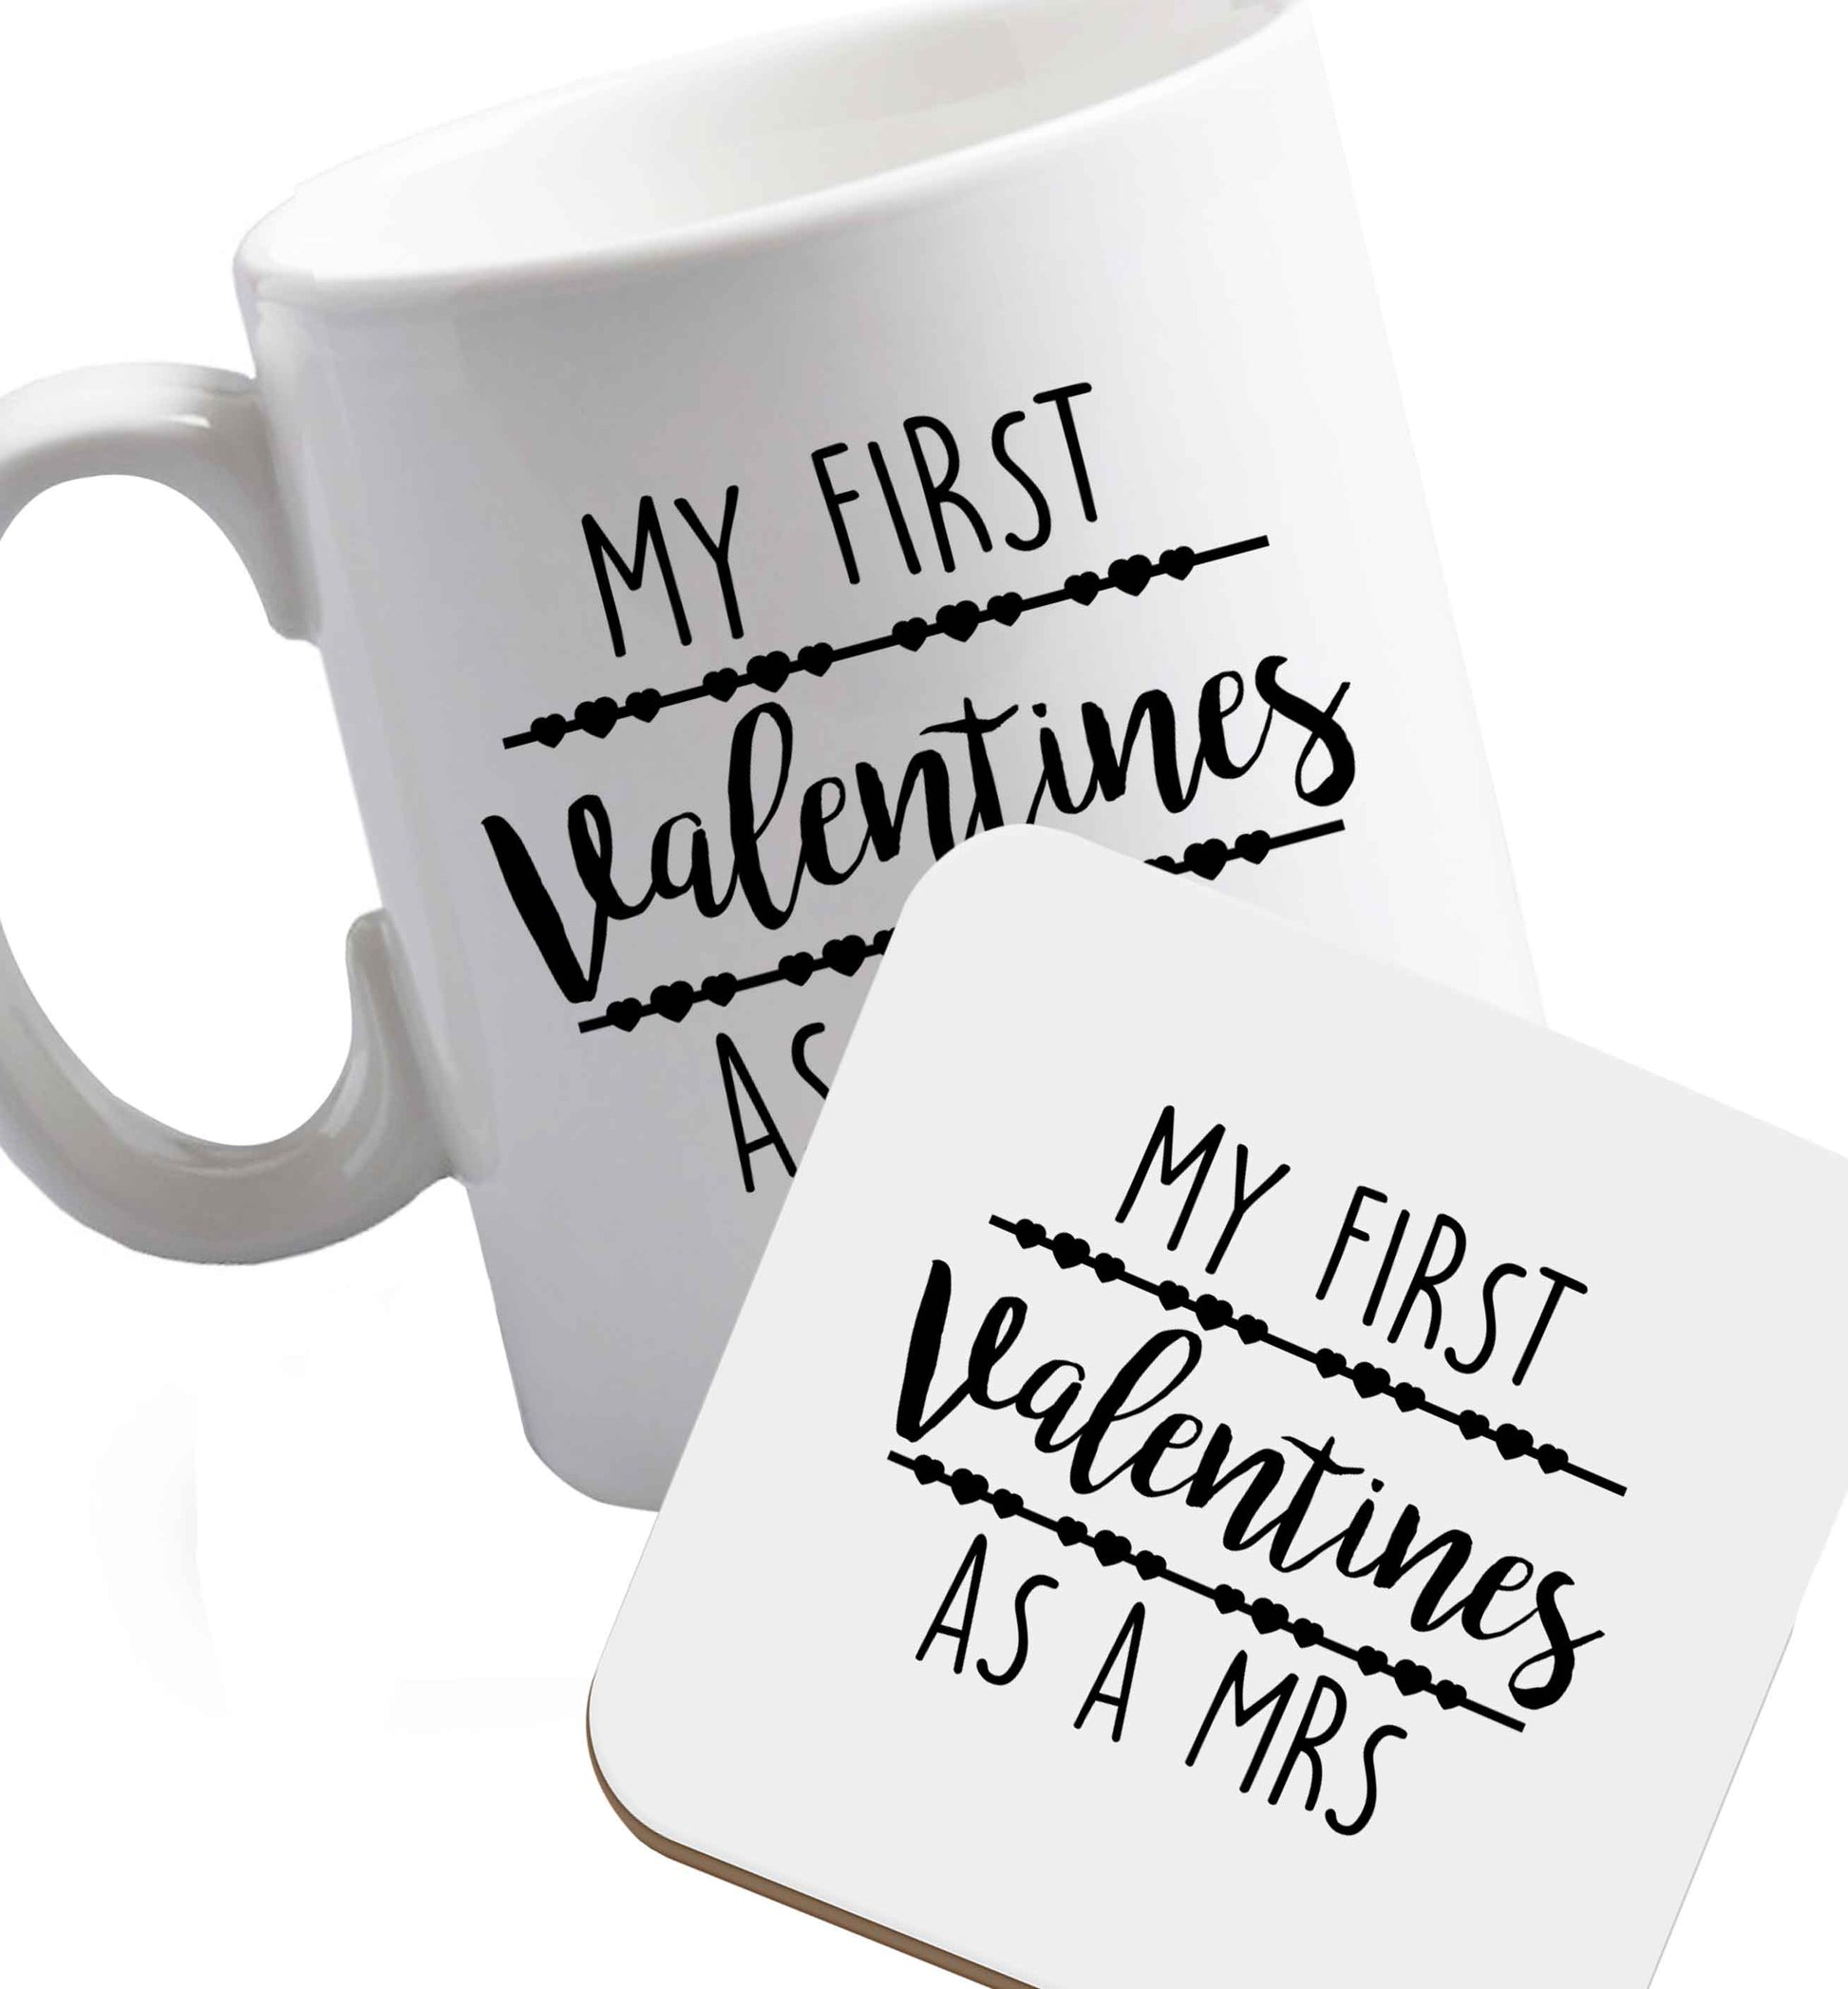 10 oz My first valentines as a Mrs ceramic mug and coaster set right handed